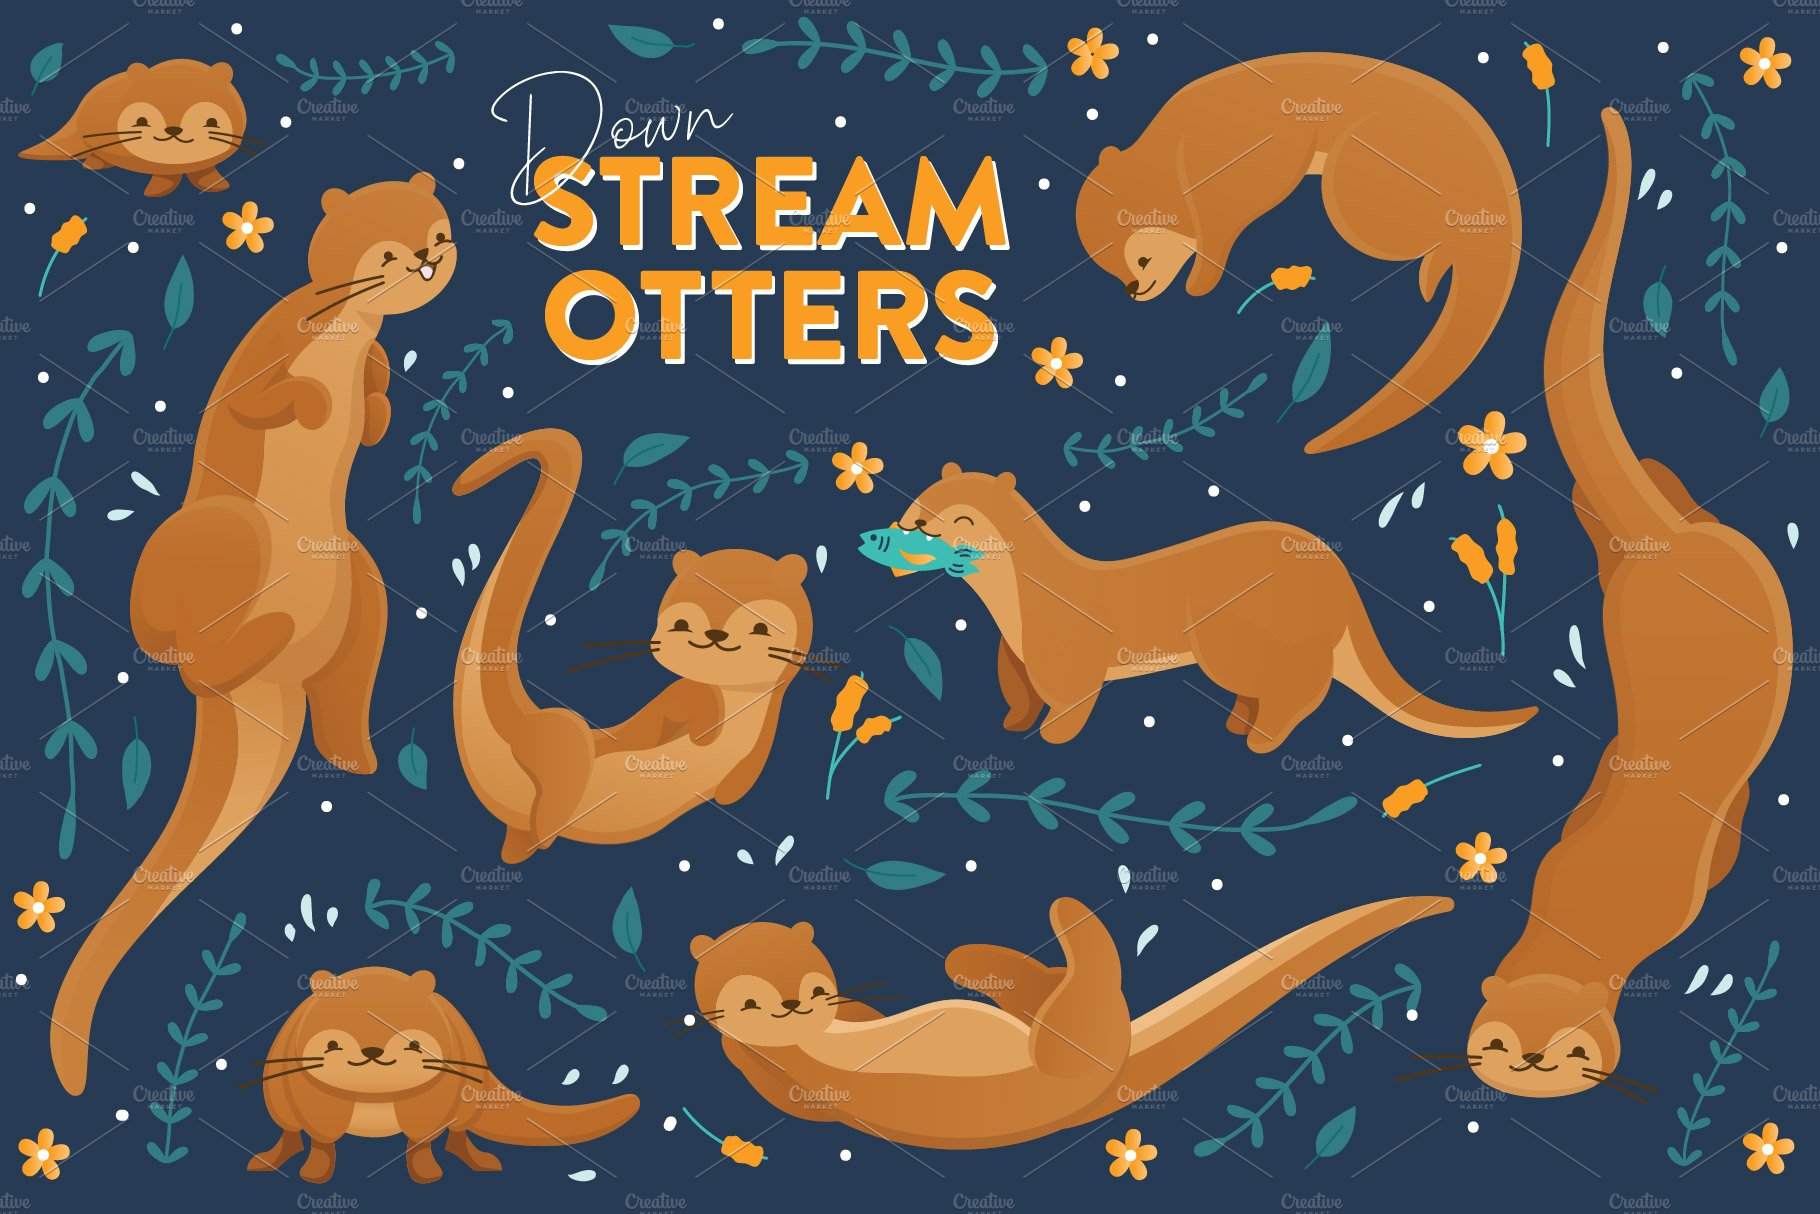 Otters Down Stream cover image.